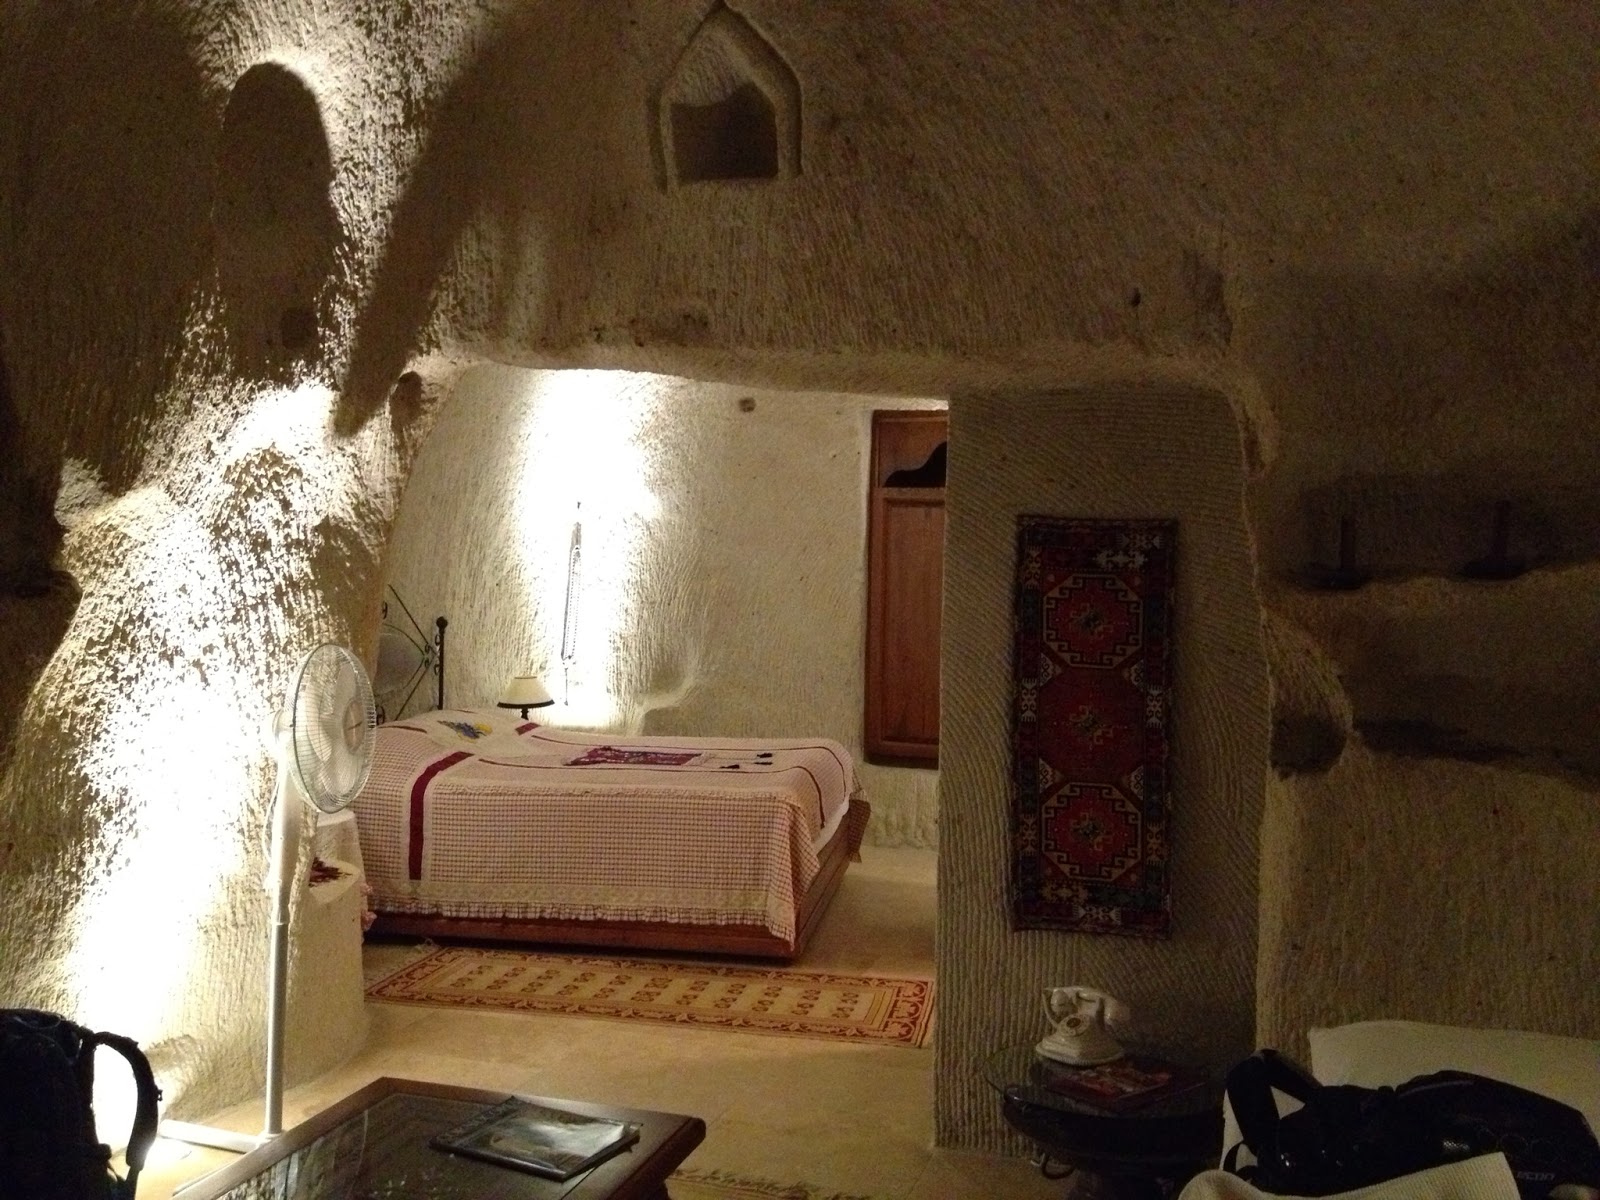 Cappadocia - Our cave sweet cave for 2 nights